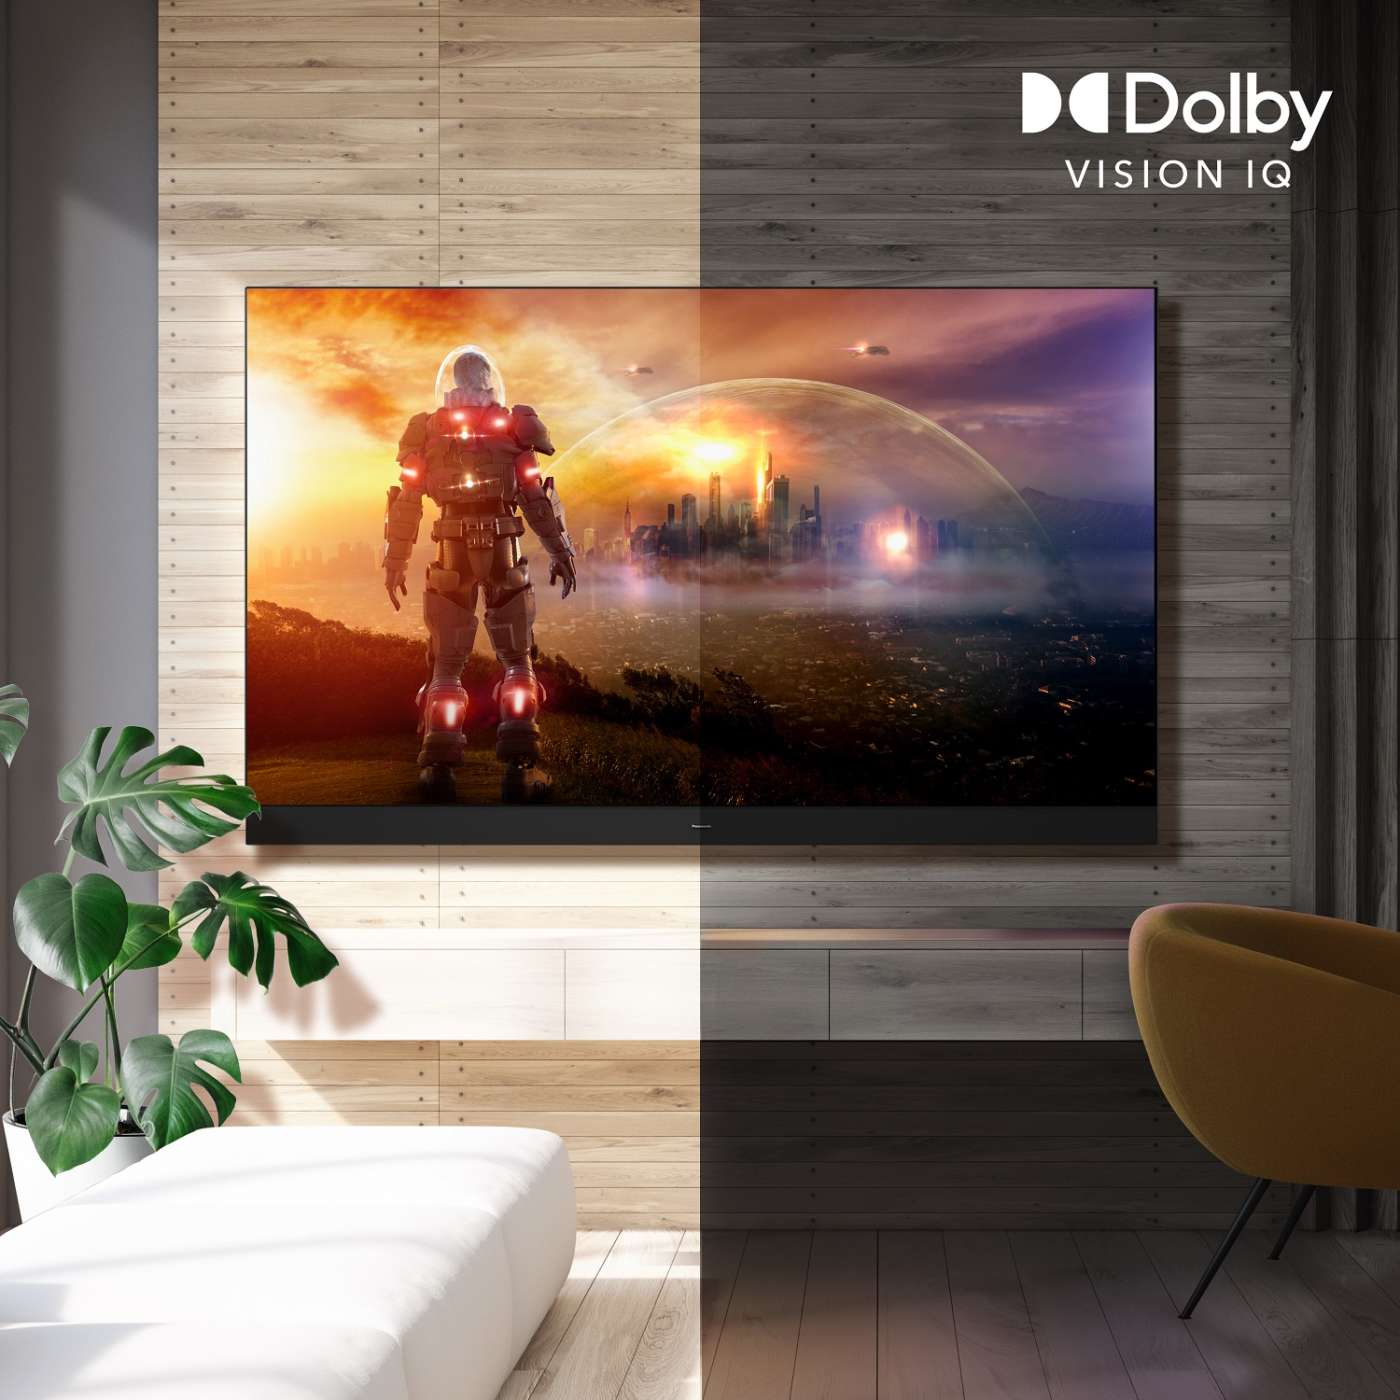 Dolby_Vision_IQ